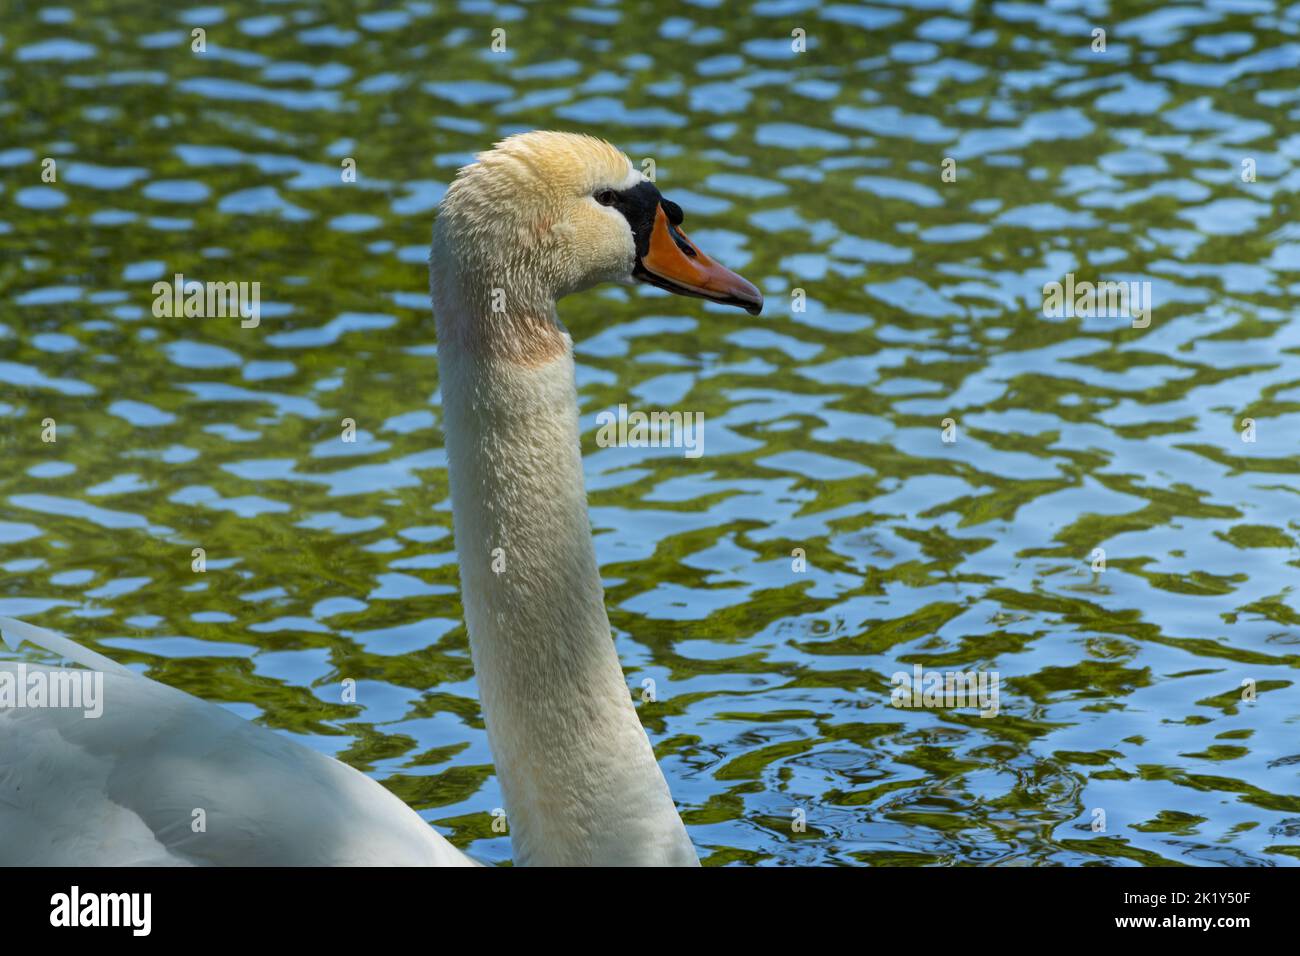 A white swan highlighted by Monet-like colors in a pond in Stratford, Ontario. Regal swan out for a swim. Stock Photo